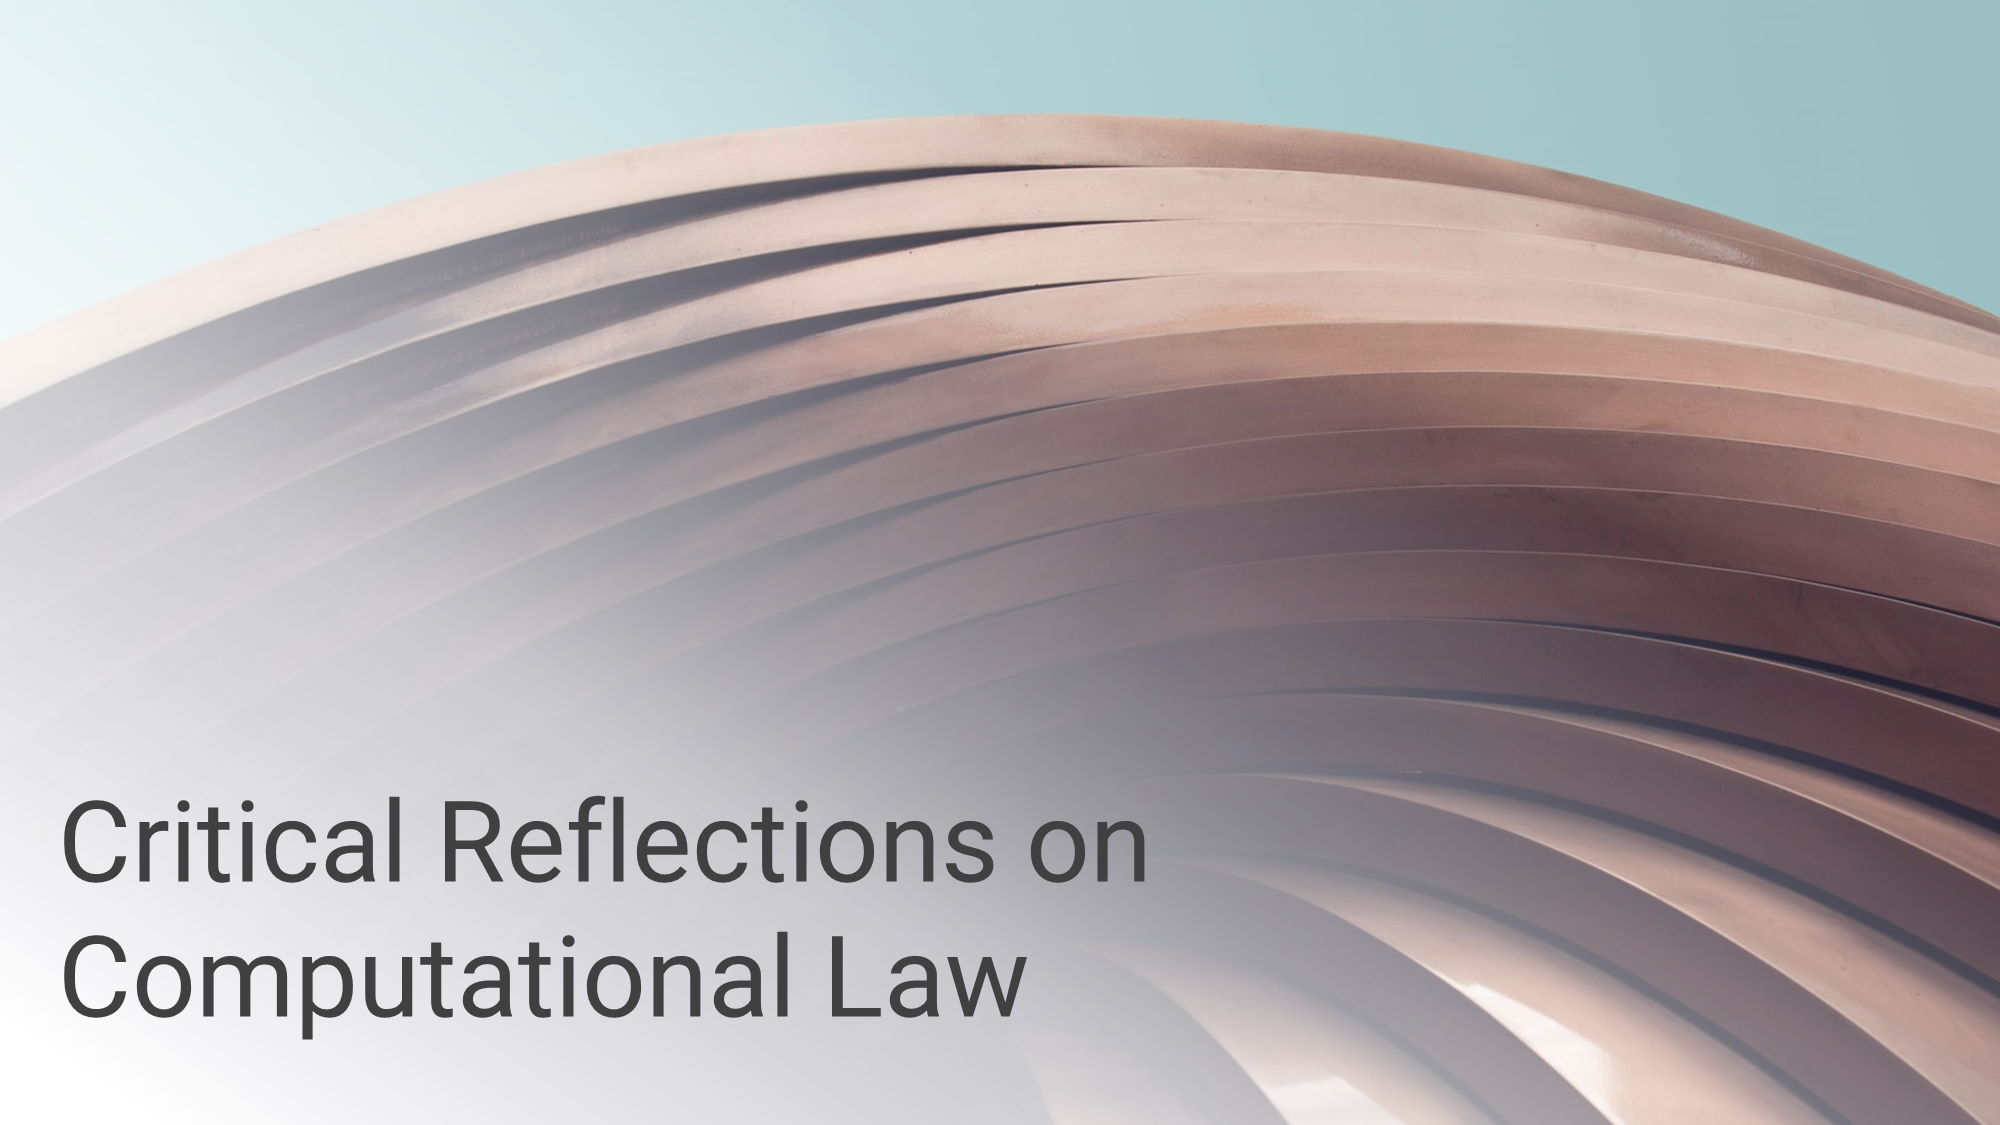 Critical Reflections on Computational Law (CRCL) course title page